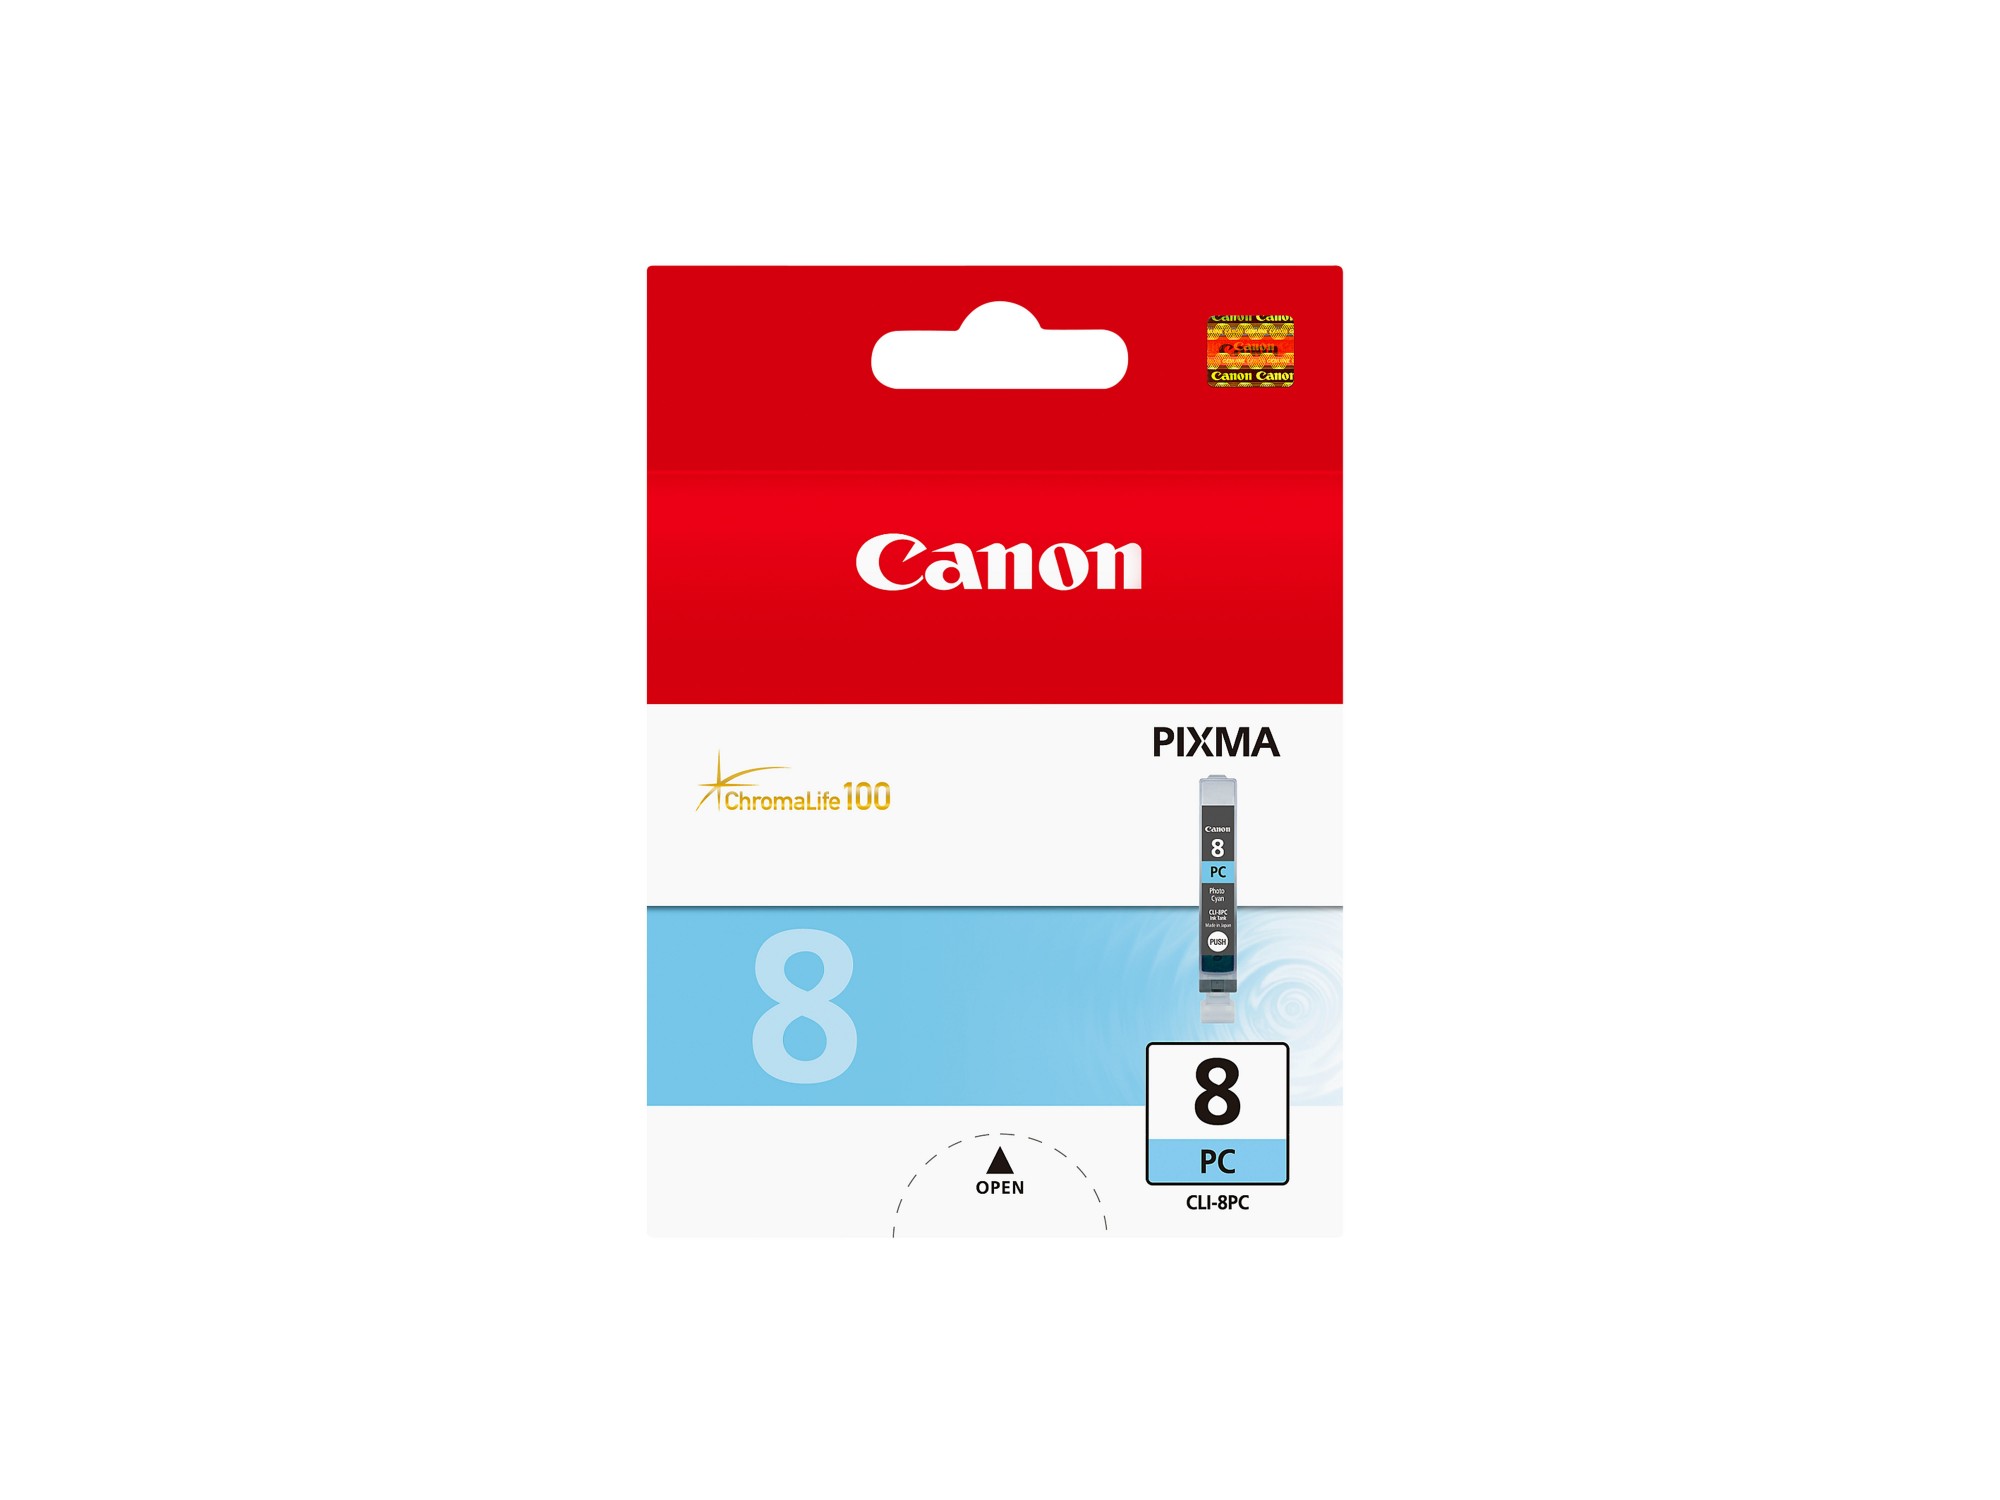 Canon 0624B001/CLI-8PC Ink cartridge light cyan, 5.72K pages 13ml for Canon Pixma IP 6600/MP 960/Pro 9000